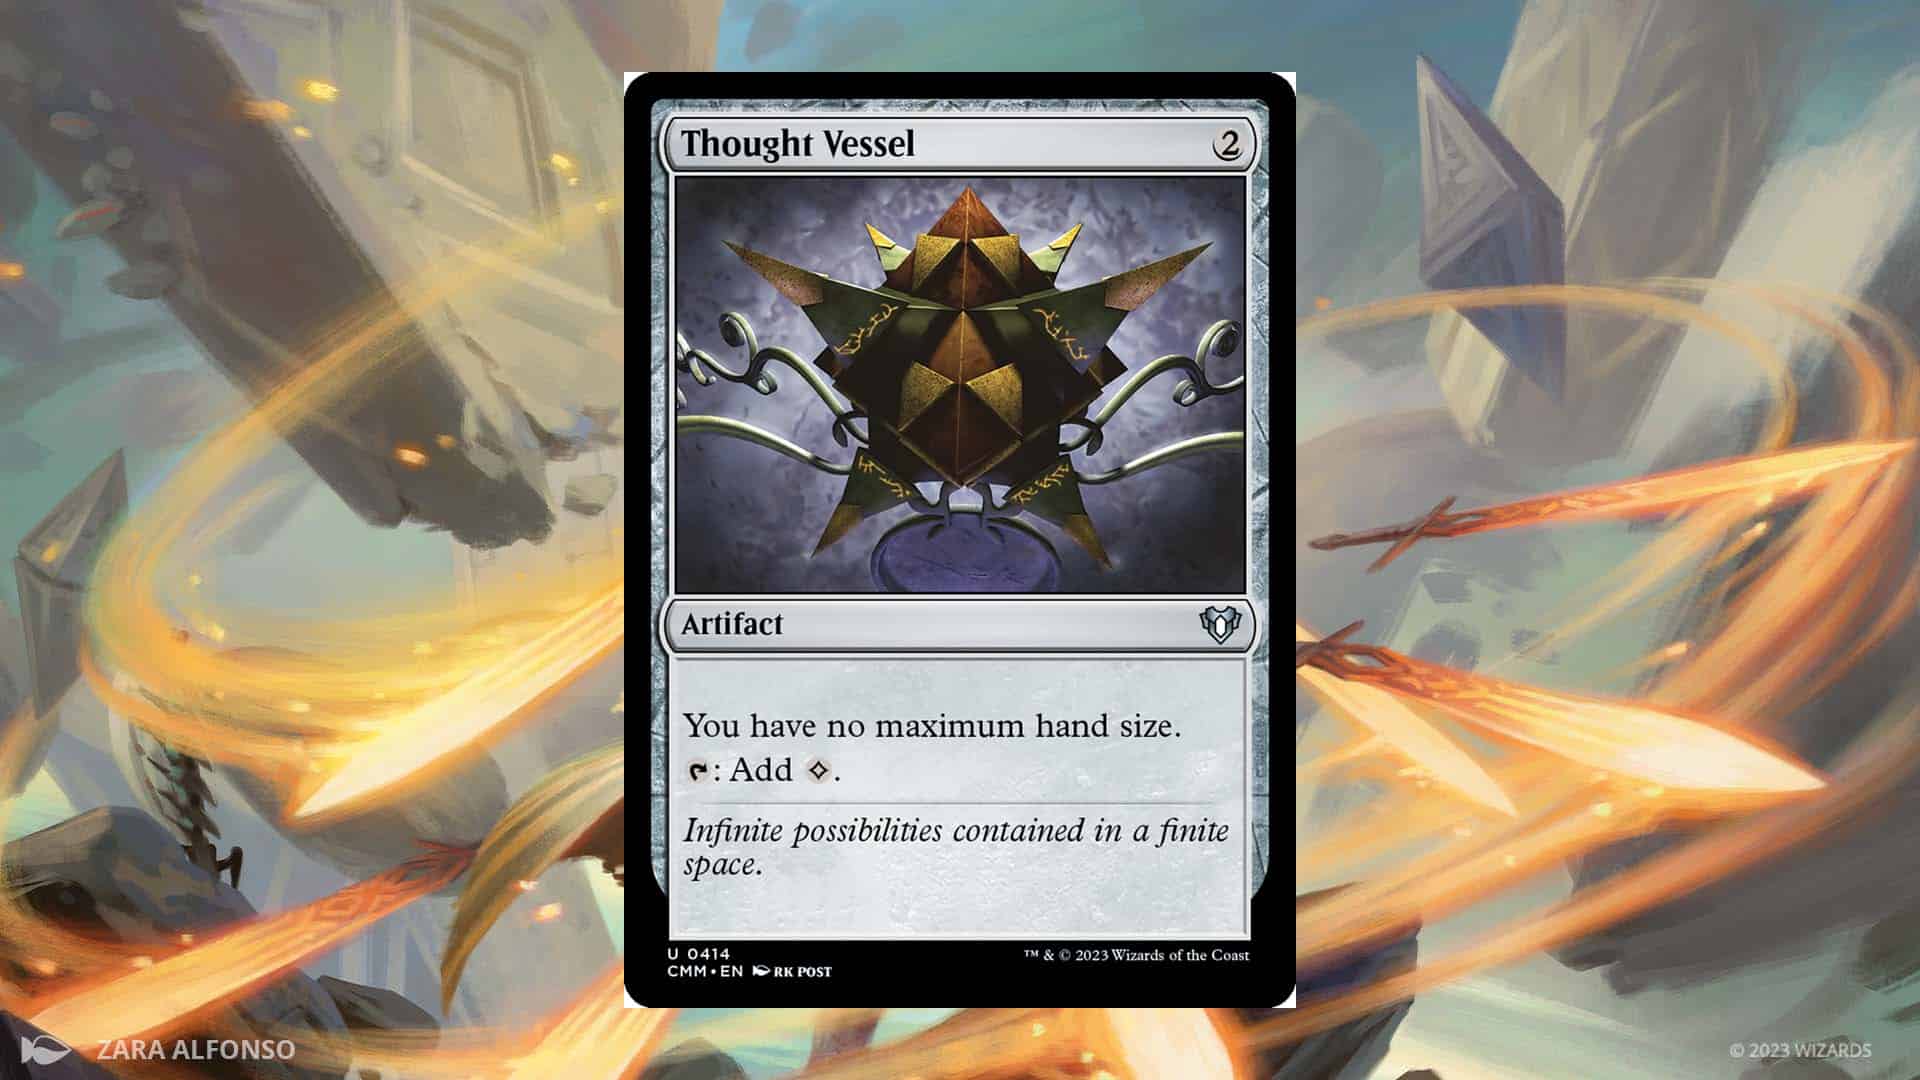 Picture of Thought Vessel from Magic: the Gathering